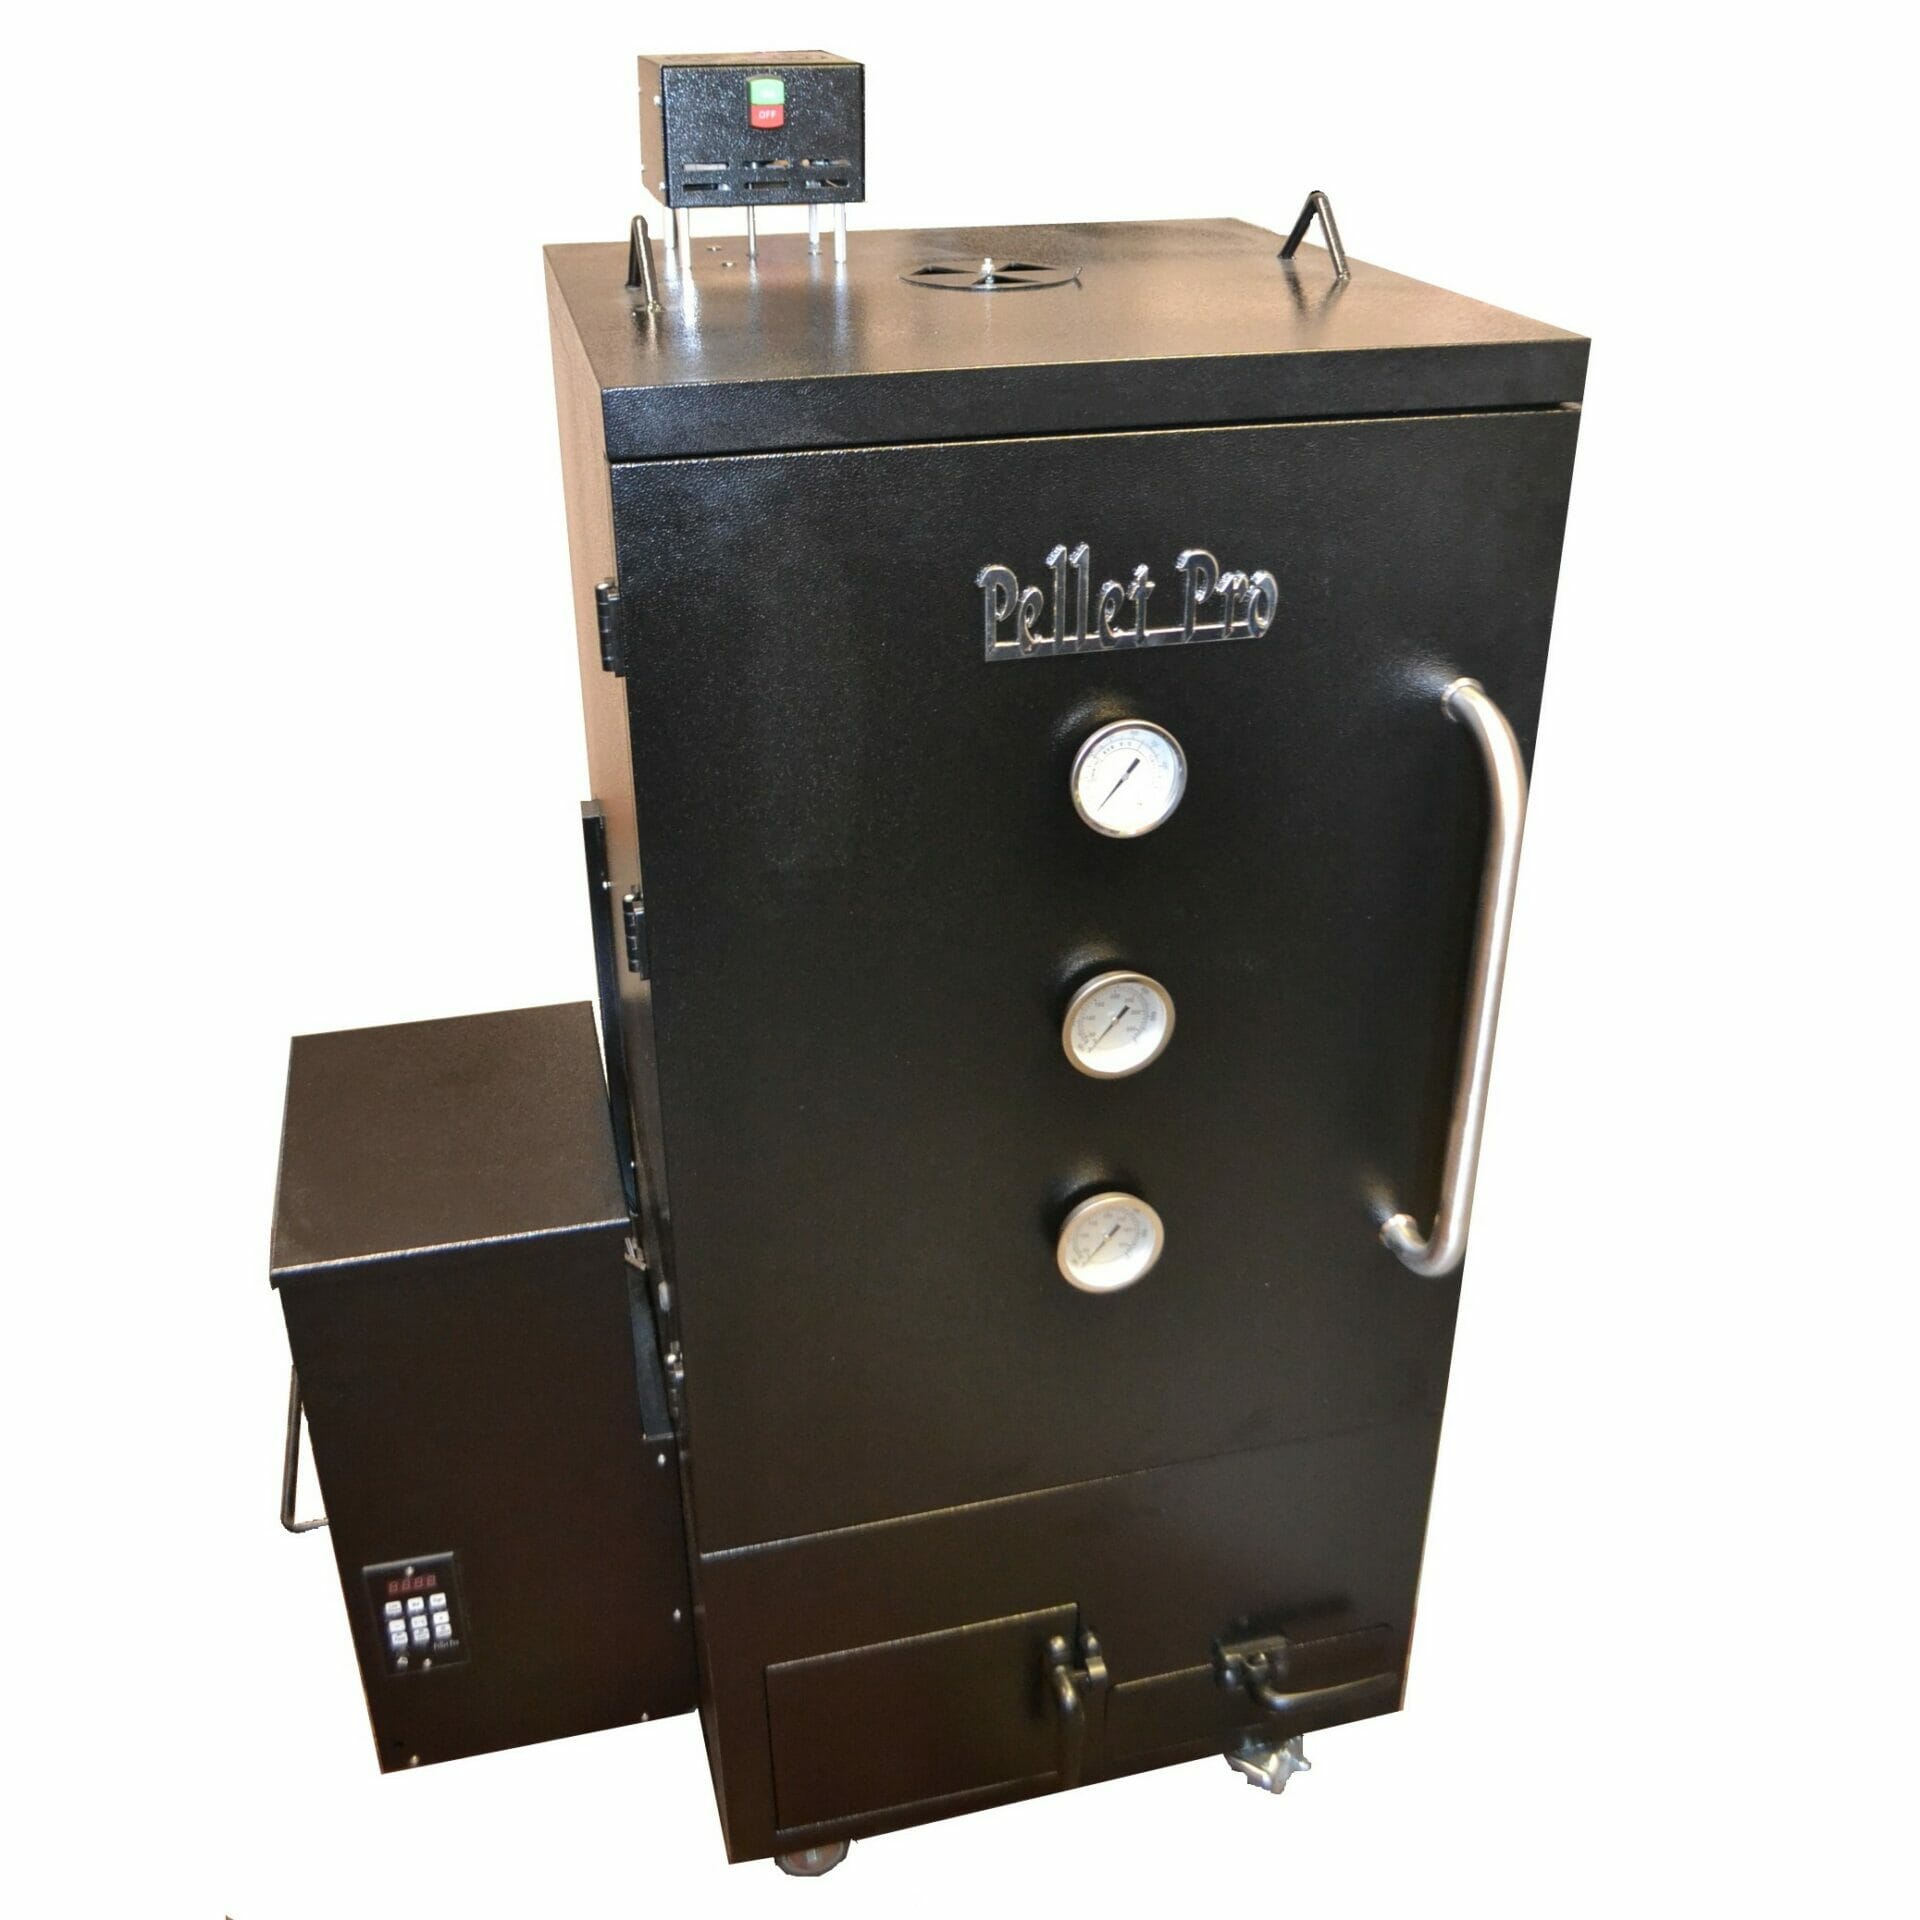 The Pellet Pro Vertical Double Wall Cabinet Pellet Smoker With